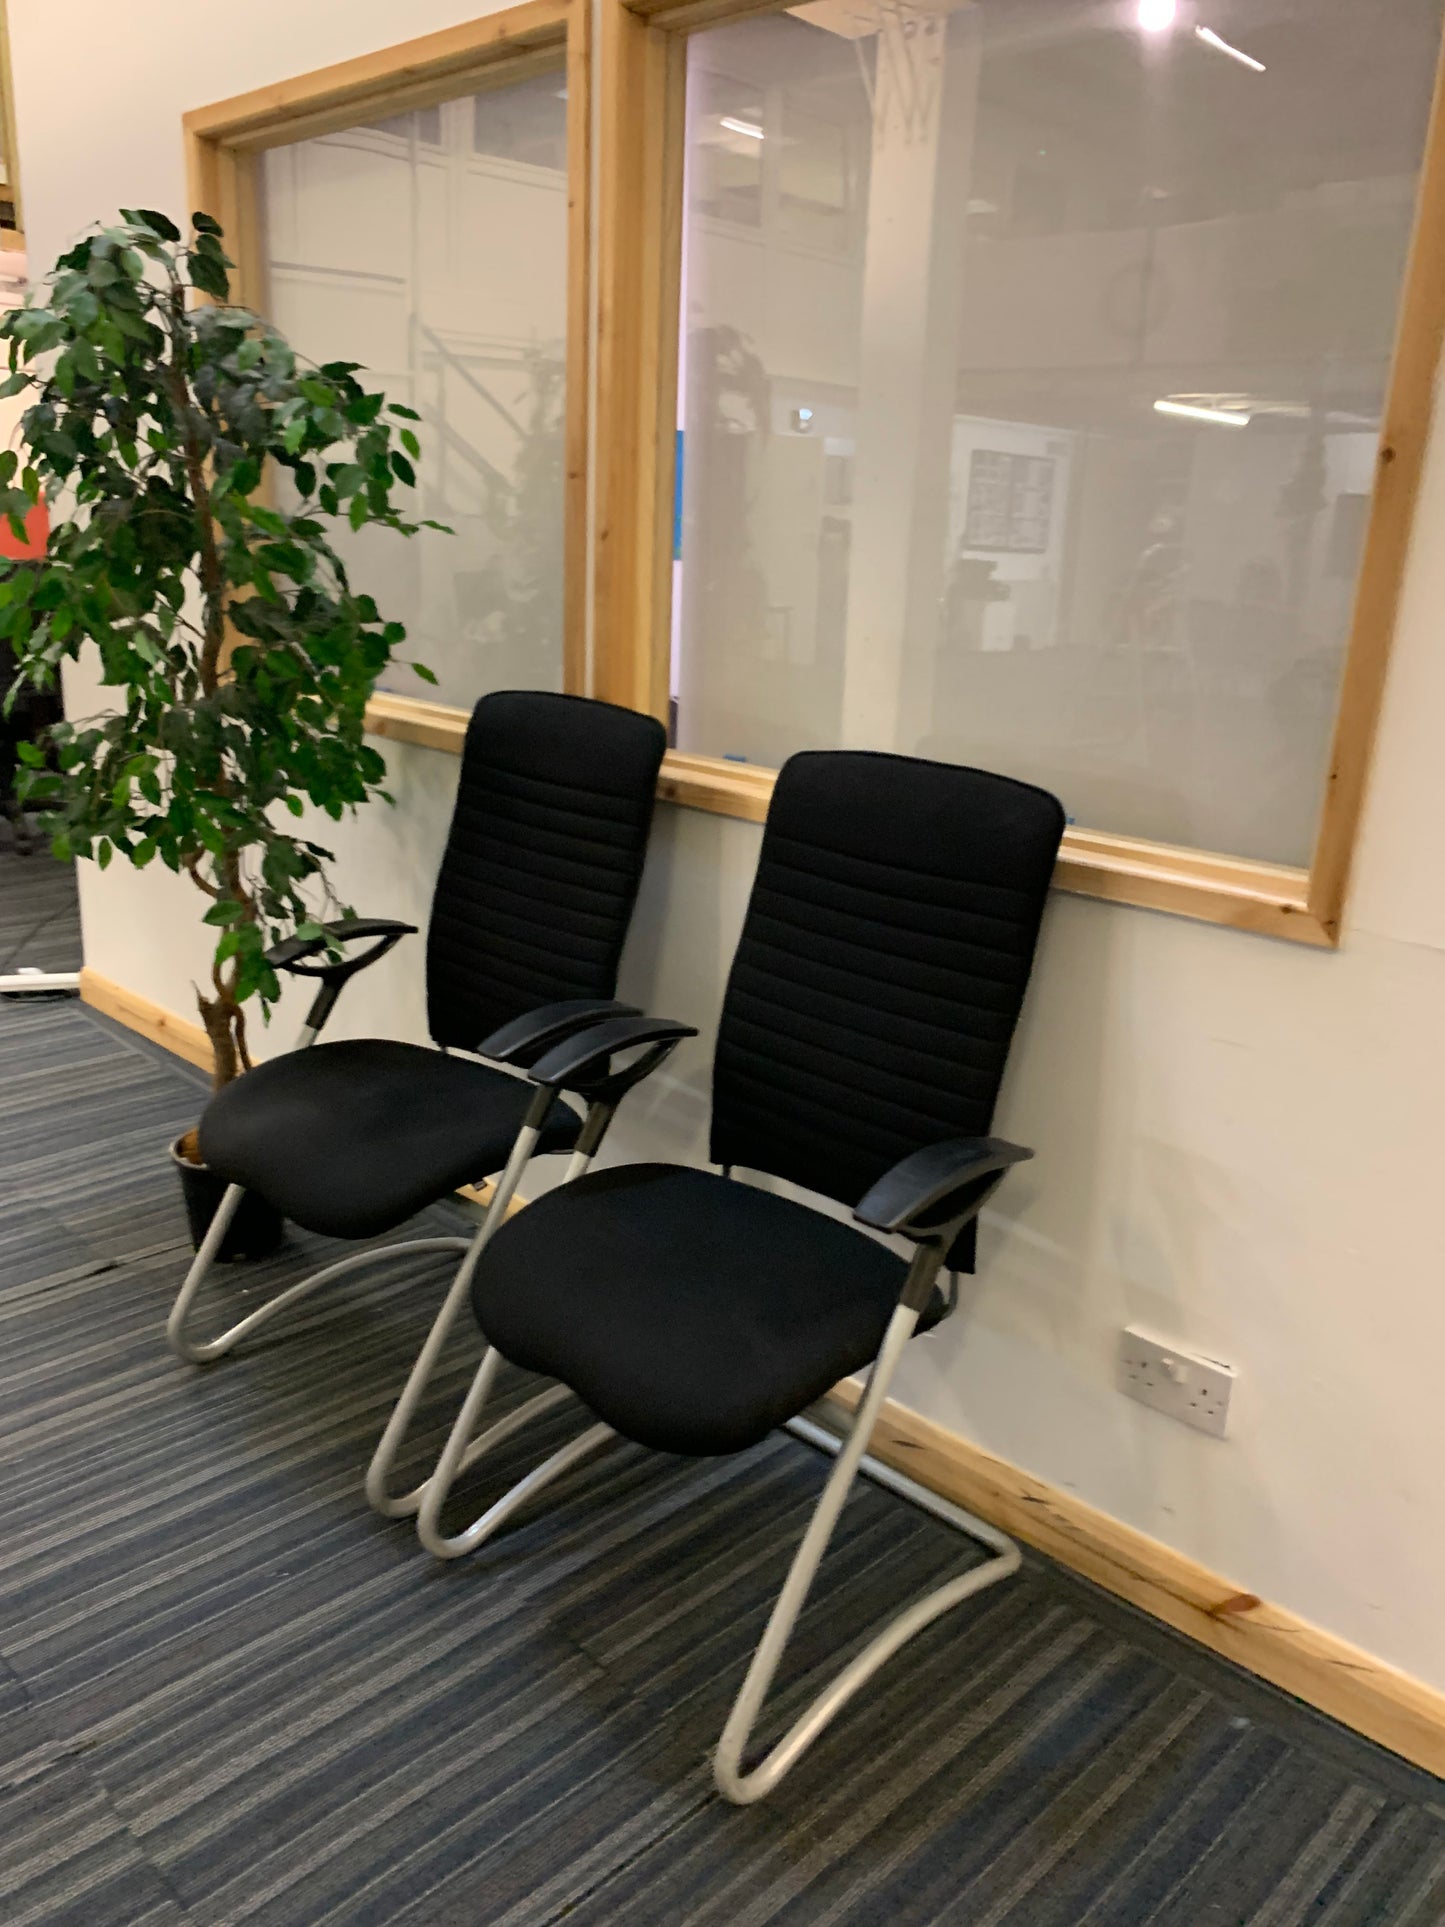 centre, two black office executive sitland chairs in front of window, left, green plant